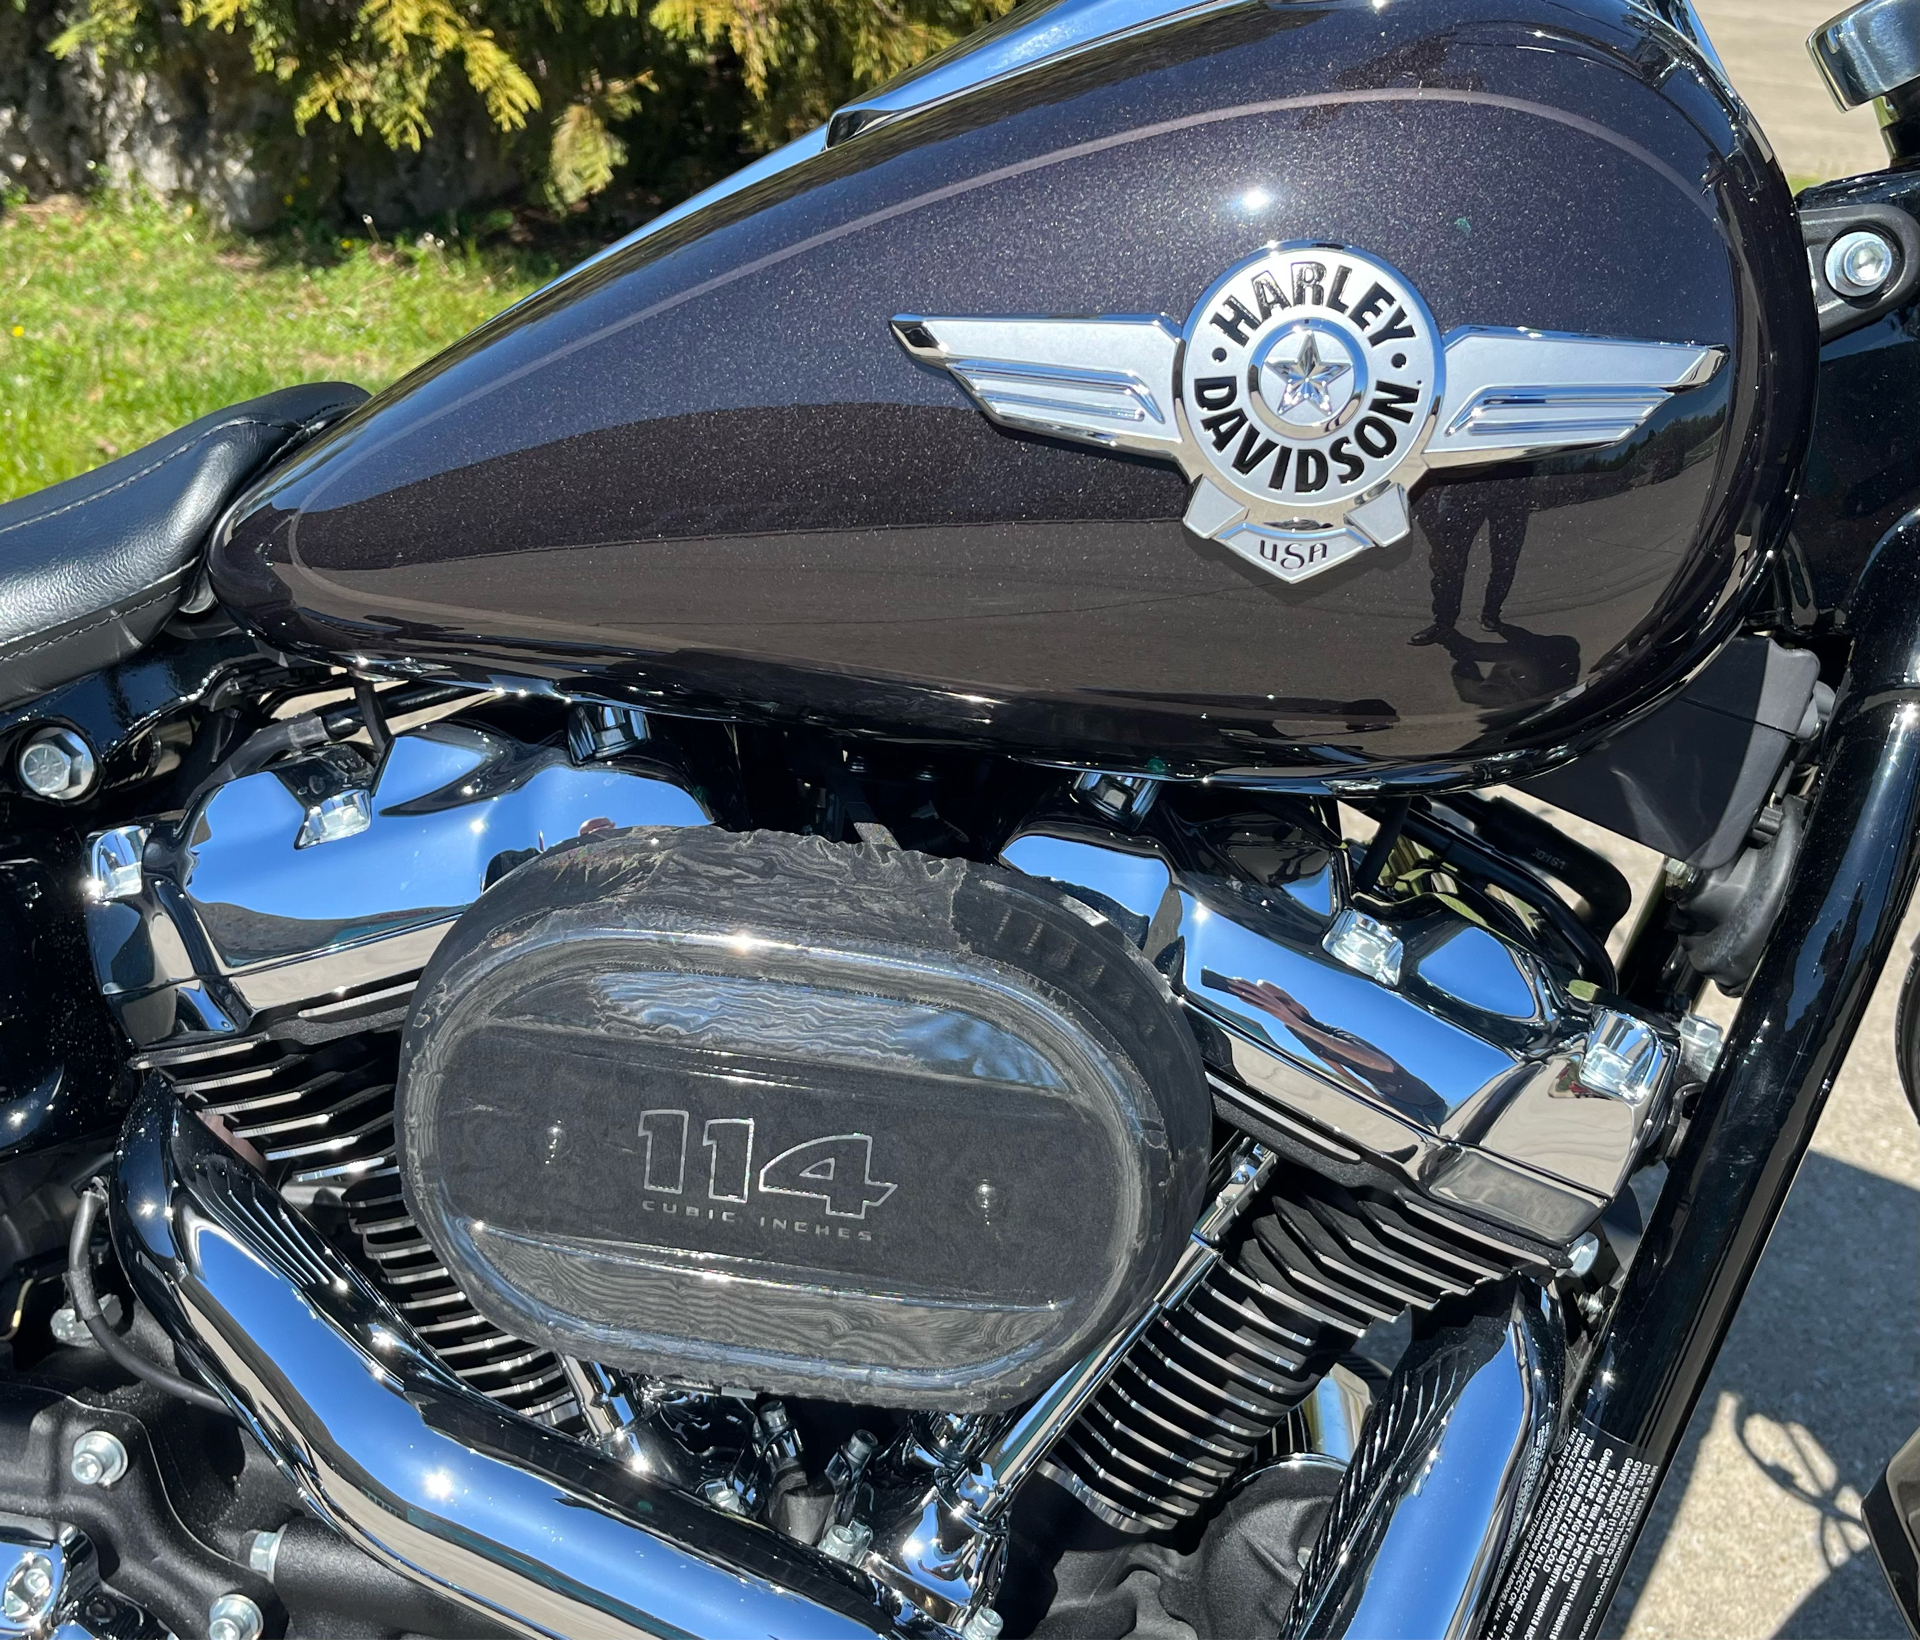 2021 Harley-Davidson Fat Boy 114 in Columbia, Tennessee - Photo 4